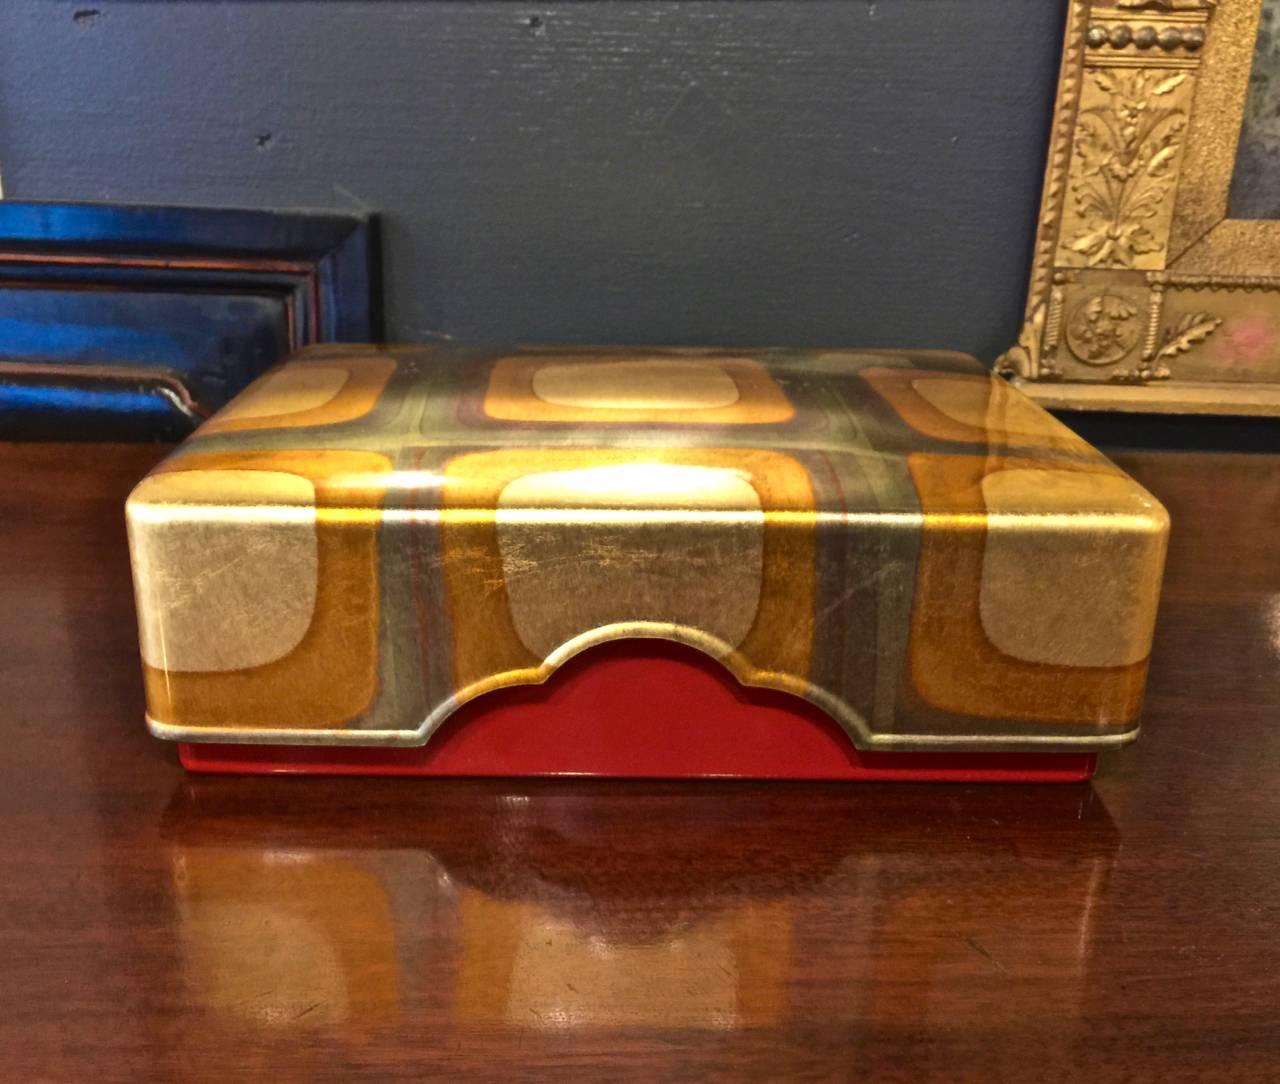 This is a stunning late 20th century, Japanese fine lacquer box that is decorated in a graphic pattern that seems to be inspired silk design. The box is in overall excellent condition; the white marks are due to light reflection.